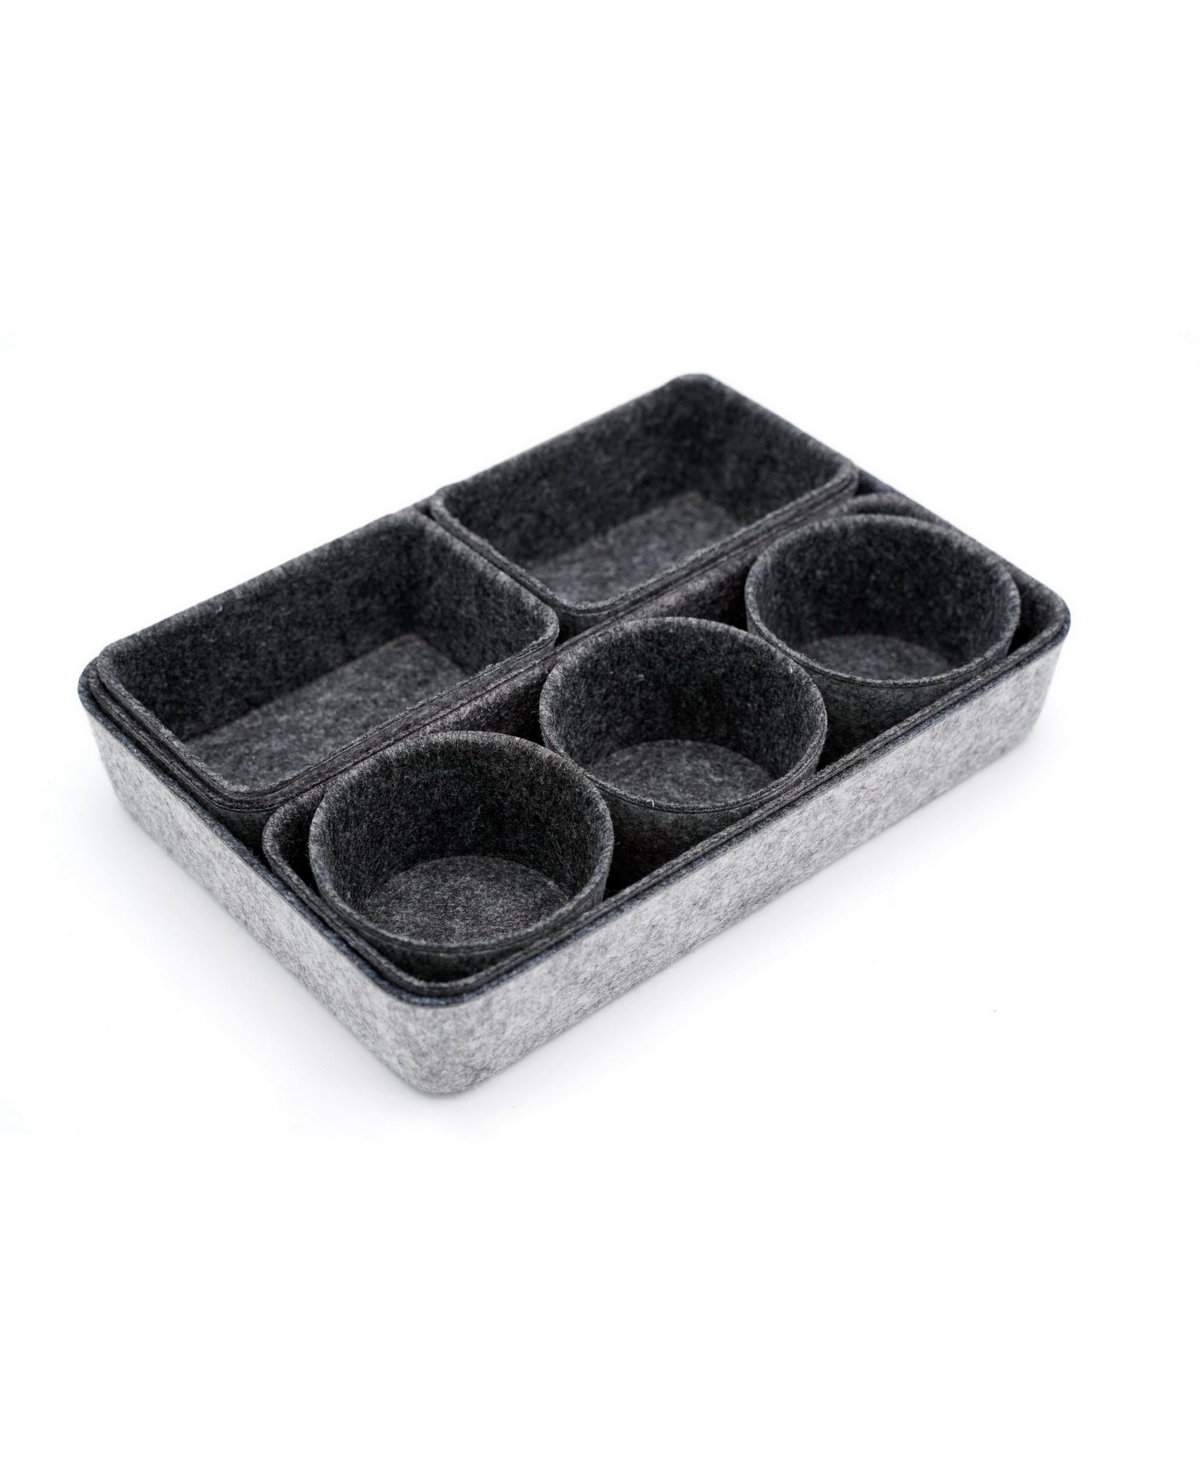 Shop Welaxy 8 Piece Felt Drawer Organizer Set With Round Cups And Trays In Charcoal